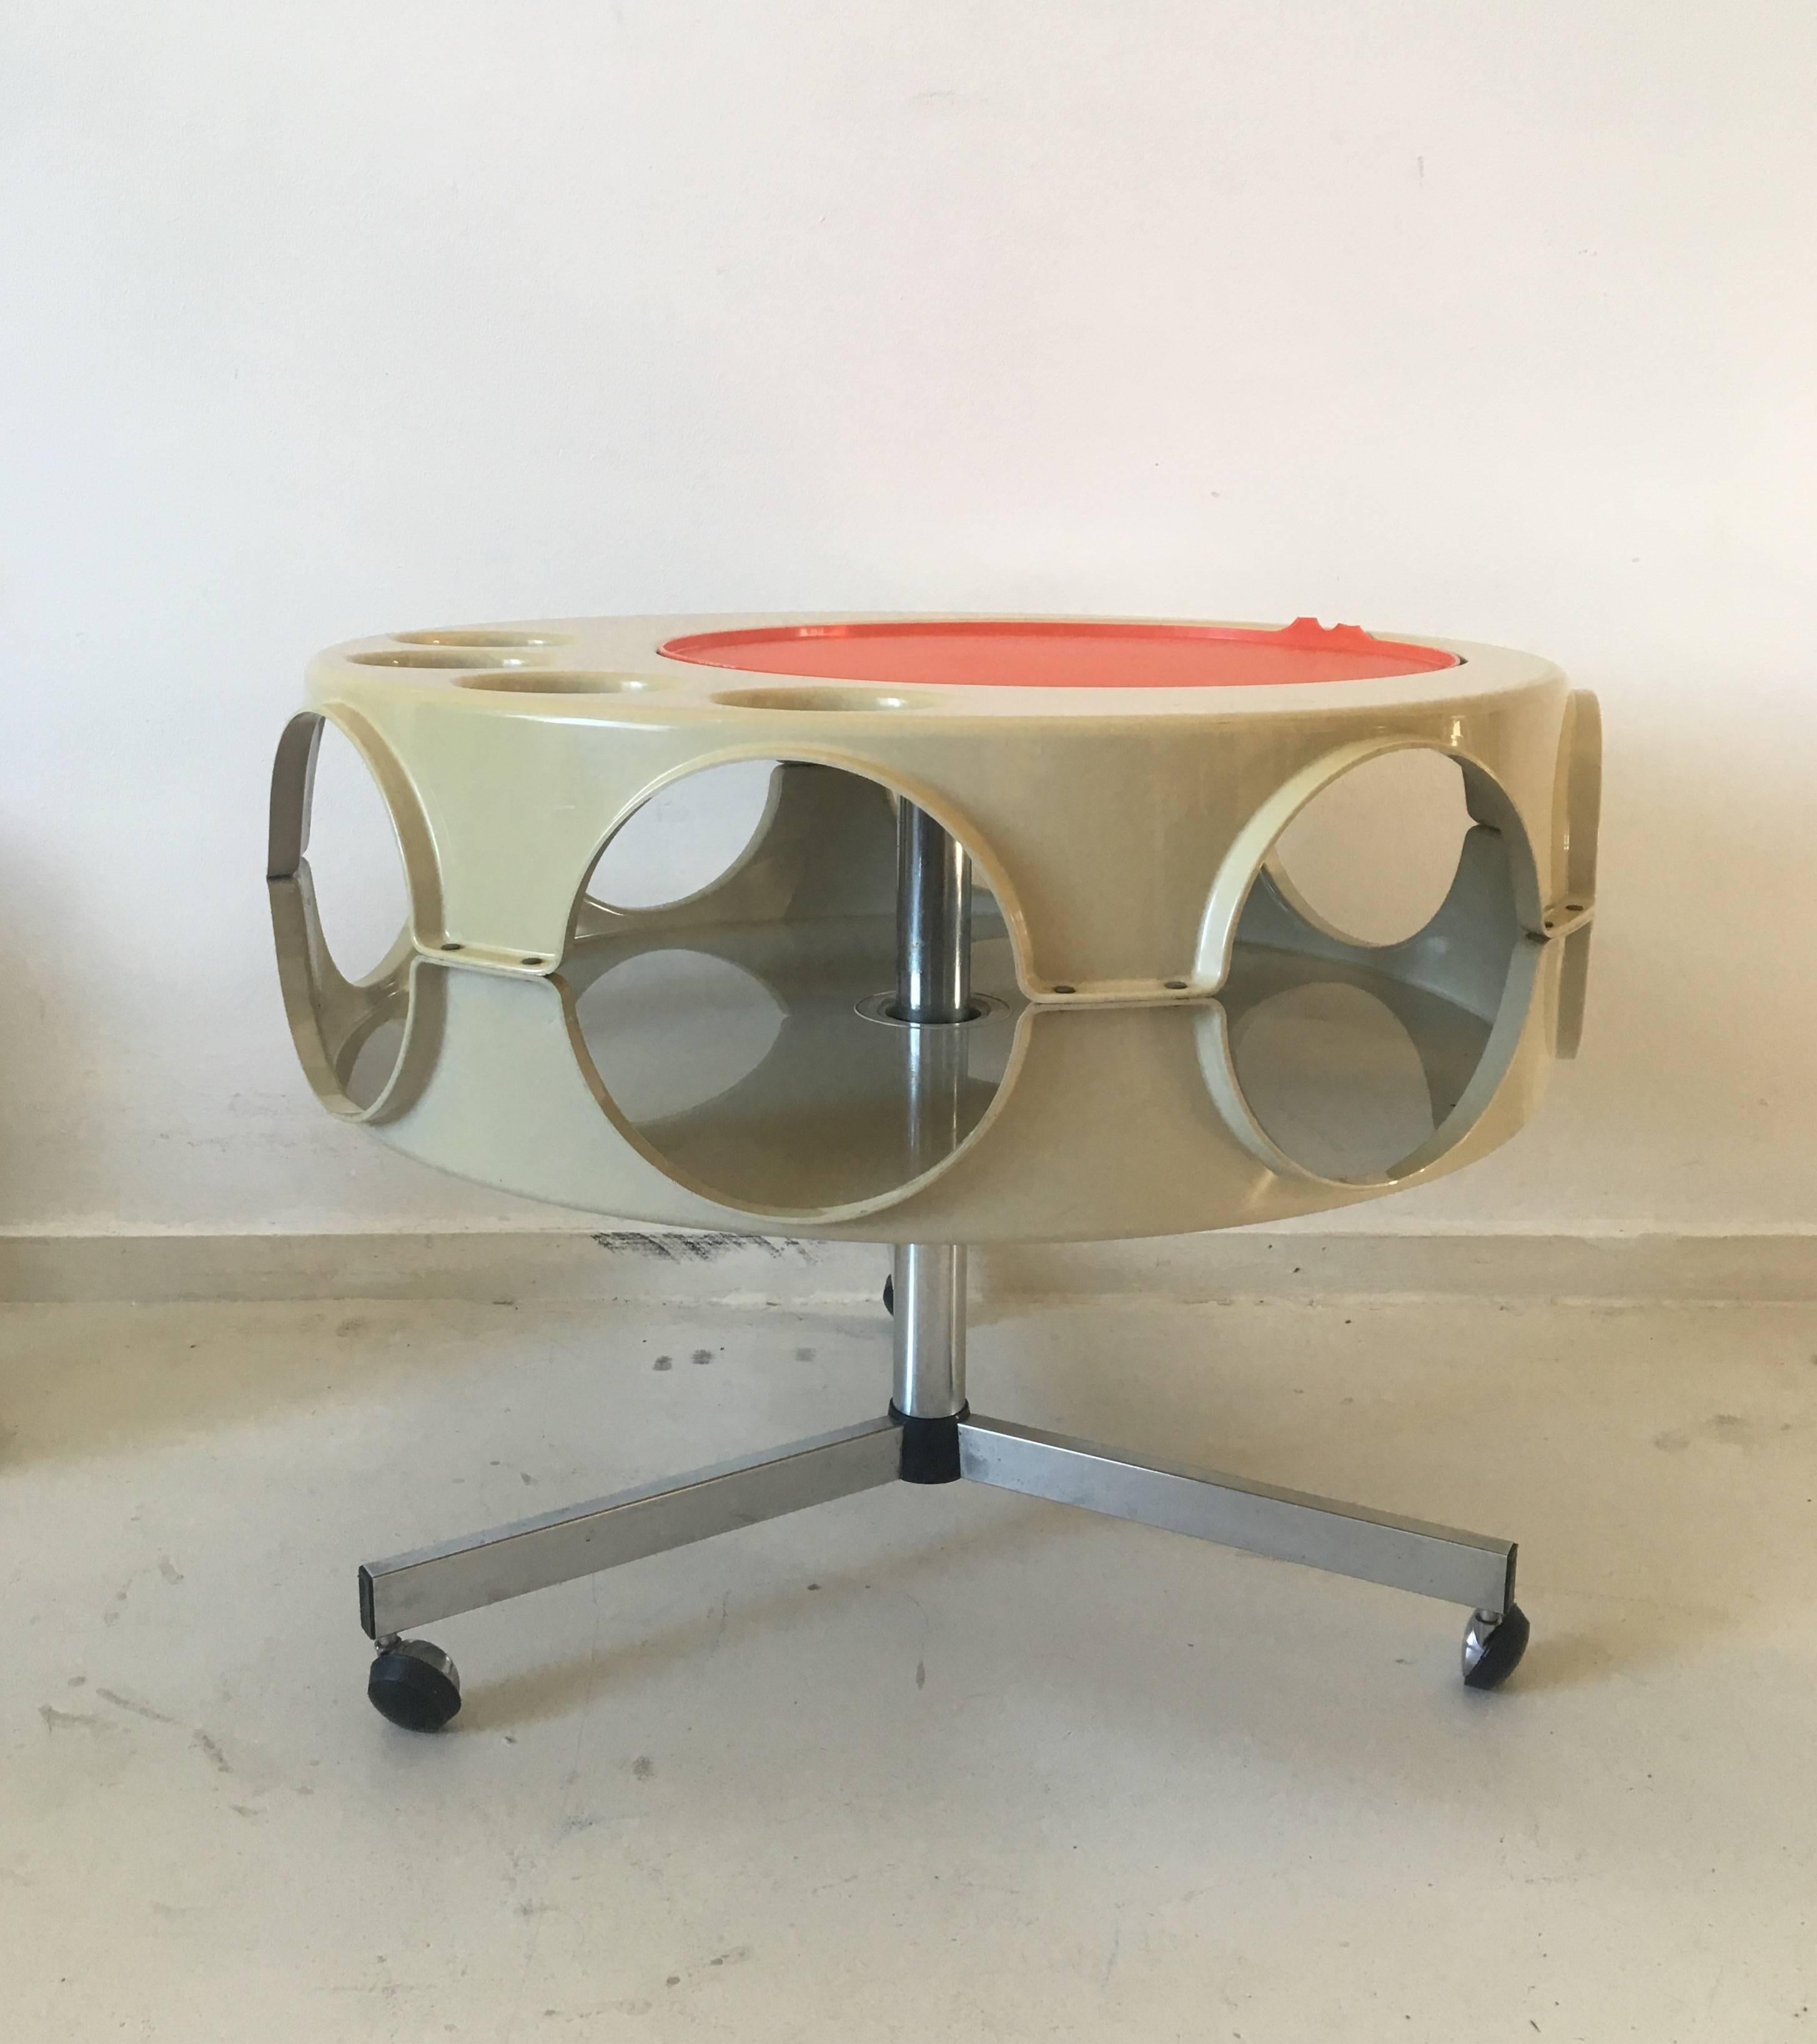 This stunning pop art era, bar table or bar cart was designed and manufactured in the Netherlands in the 1970s.
It features a Chromed metal base on wheels so that the trolley can serve you anywhere in and around the house. Its body made of ABS